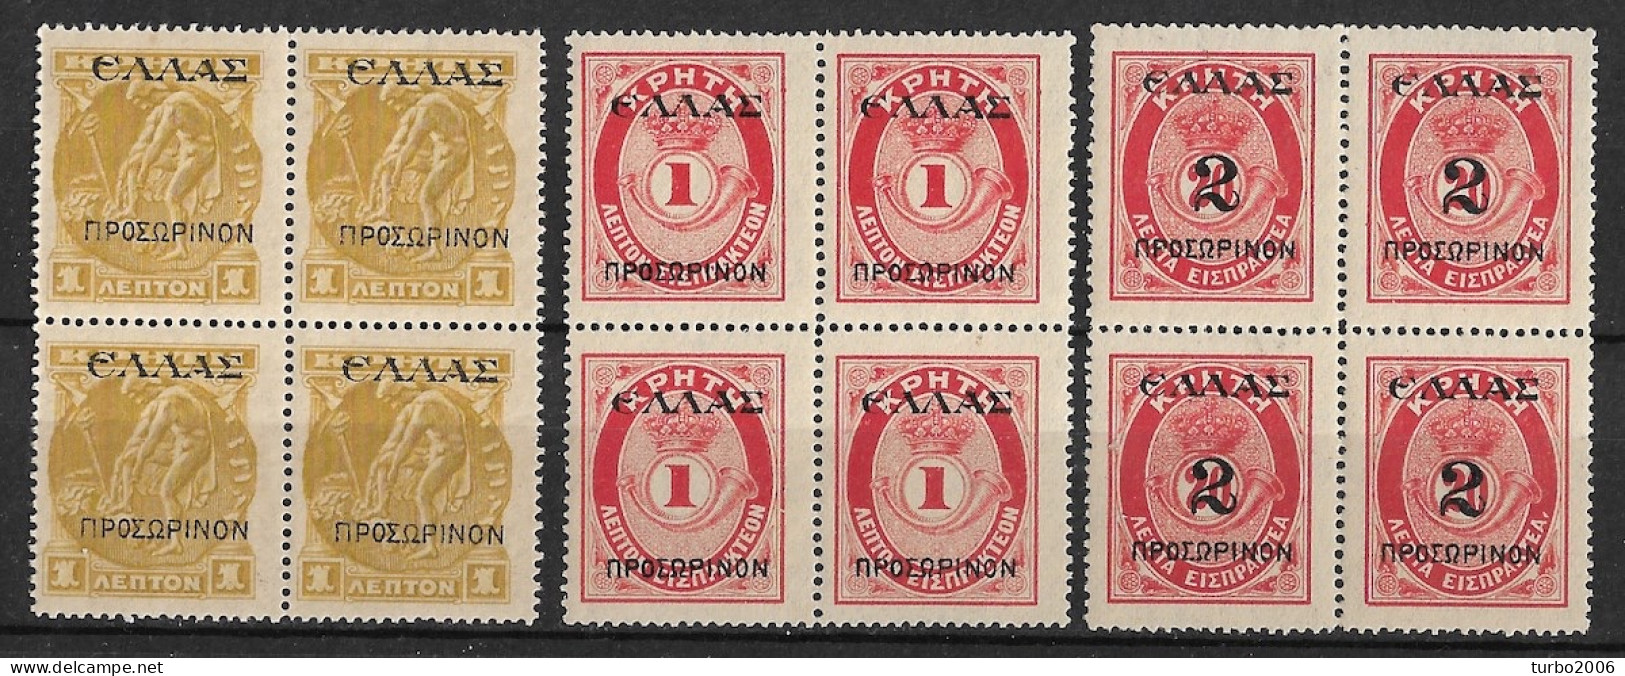 CRETE 1909 Overprinted Stamps With ELLAS + Provisional 3 Values From The Set Vl. 63-64-66 In B4 MH/MNH - Crete